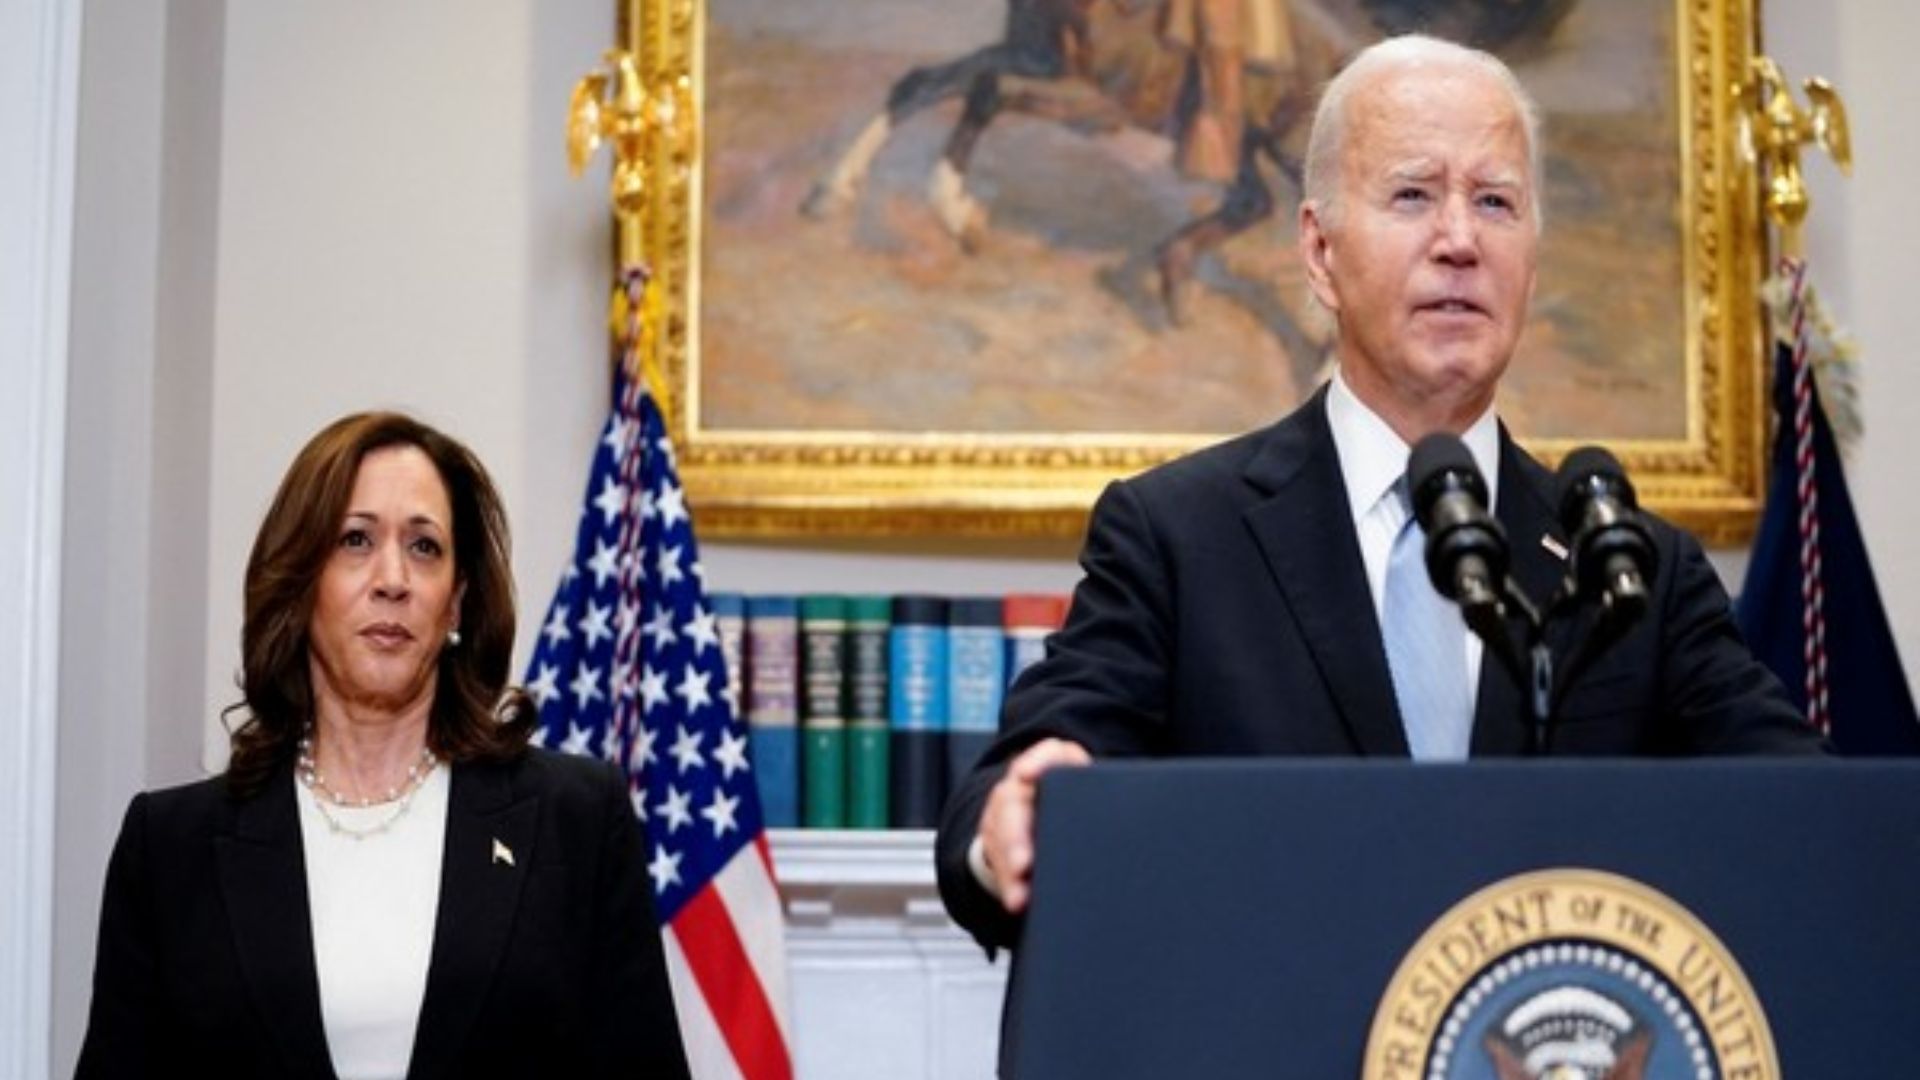 Biden’s Team Informed of His Dropout Decision One Minute Before Public Announcement